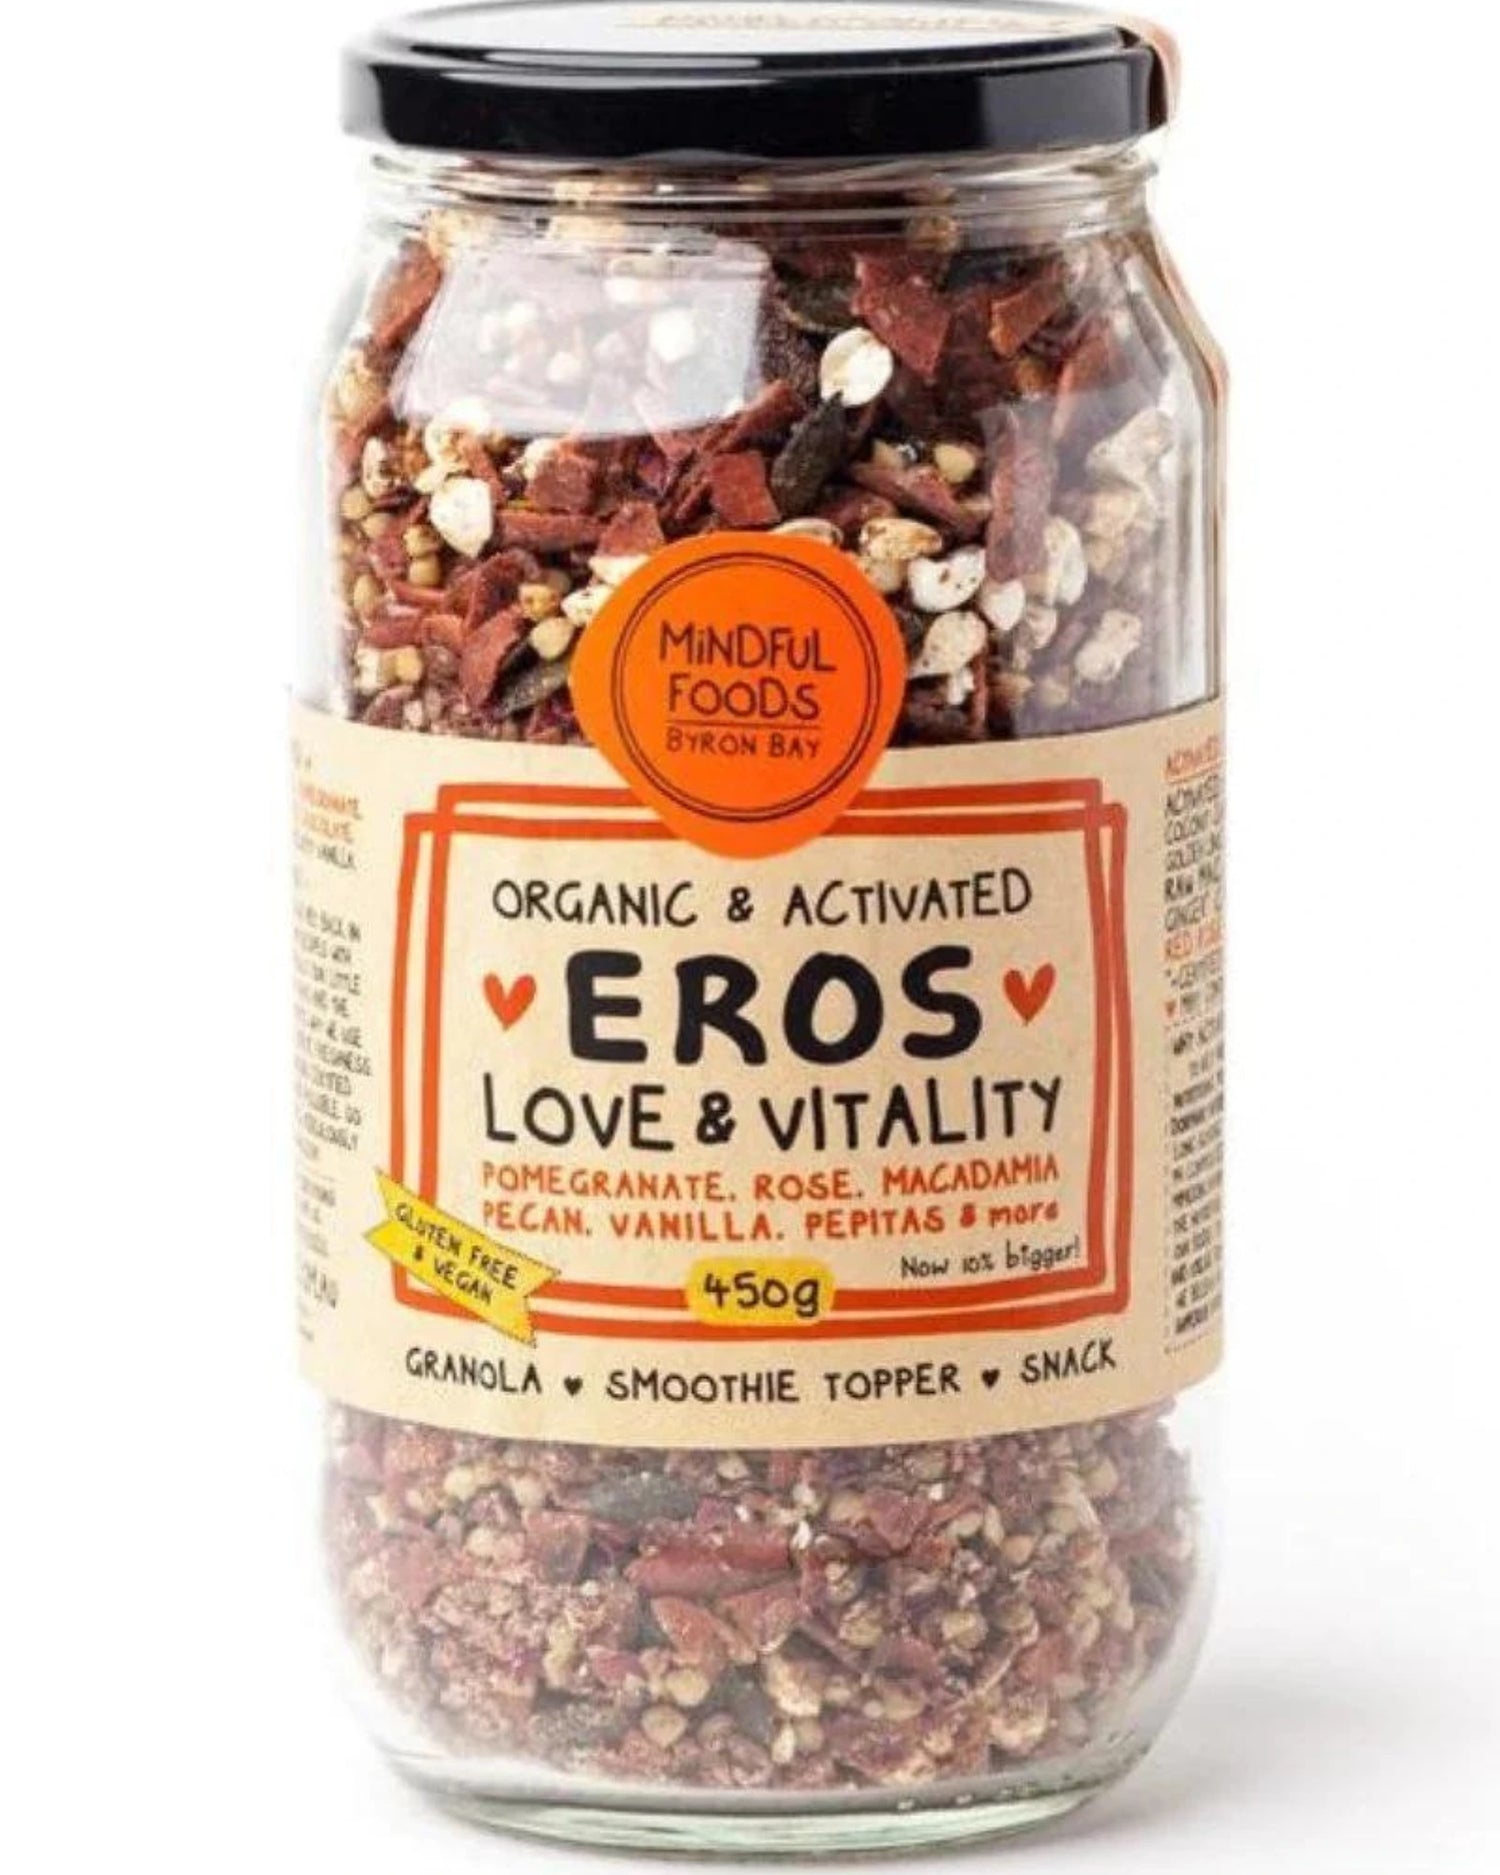  Eros Love &amp; Vitality - Organic &amp; Activated by Mindful Foods (400g) 🌸